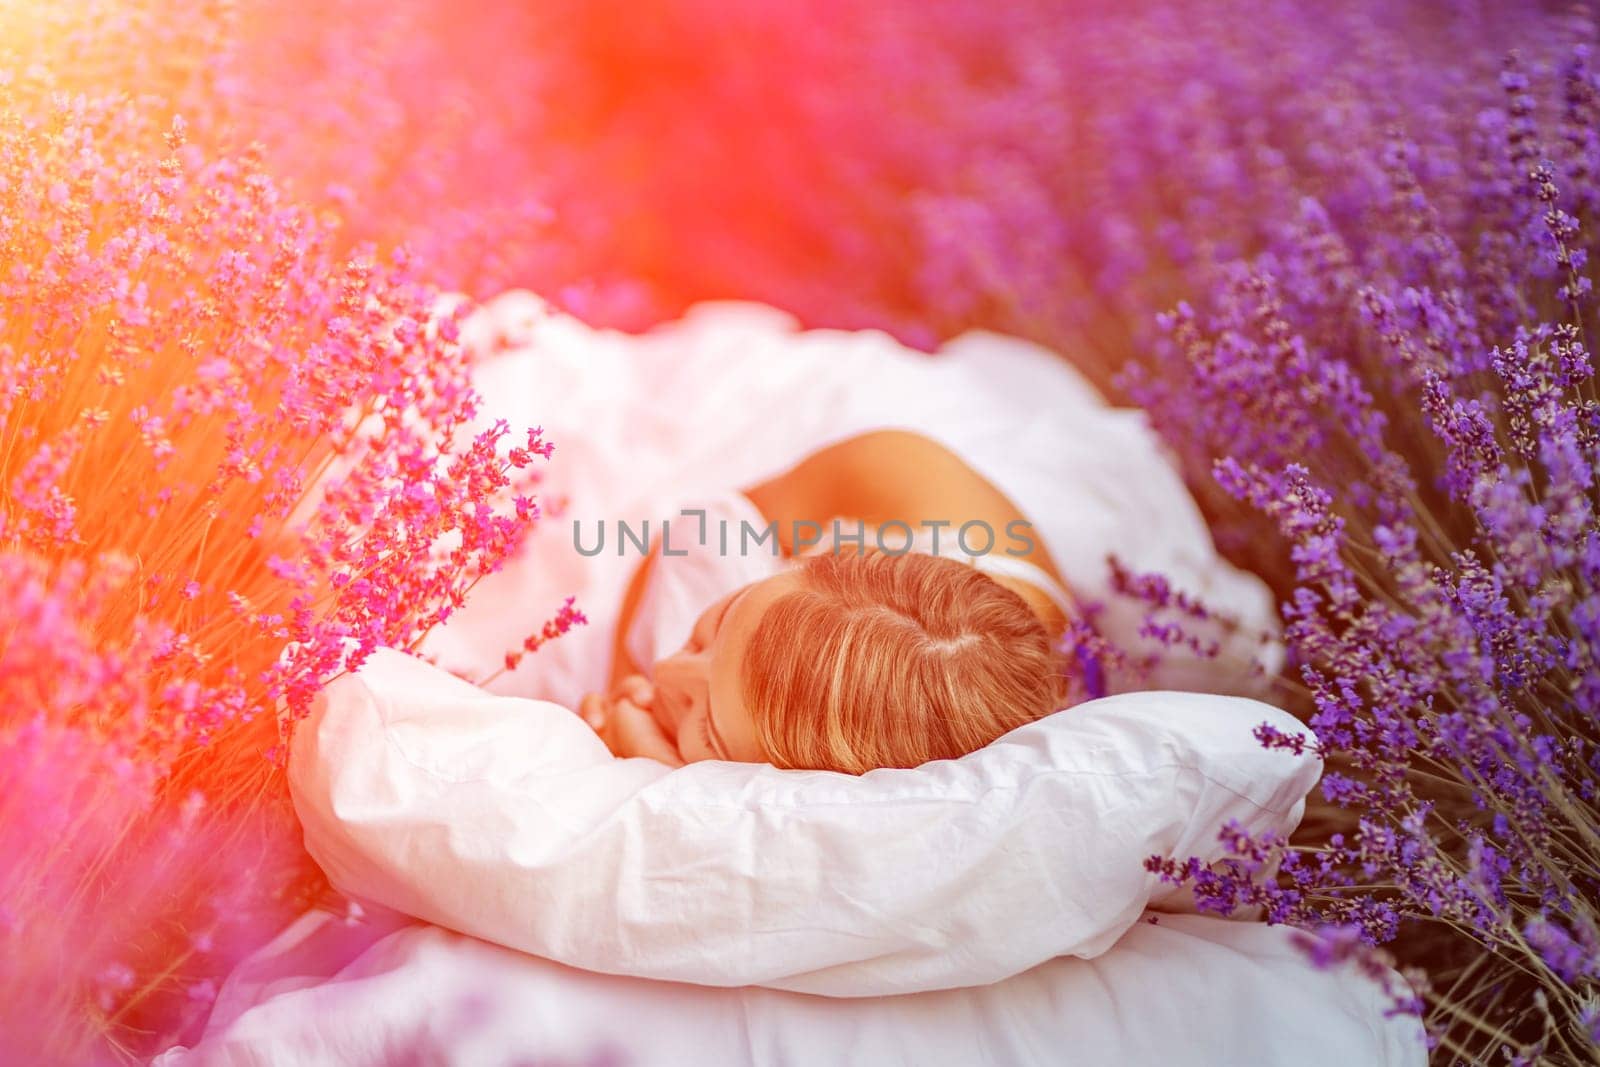 Woman lavender field. A middle-aged woman lies in a lavender field and enjoys aromatherapy. Aromatherapy concept, lavender oil, photo session in lavender by Matiunina